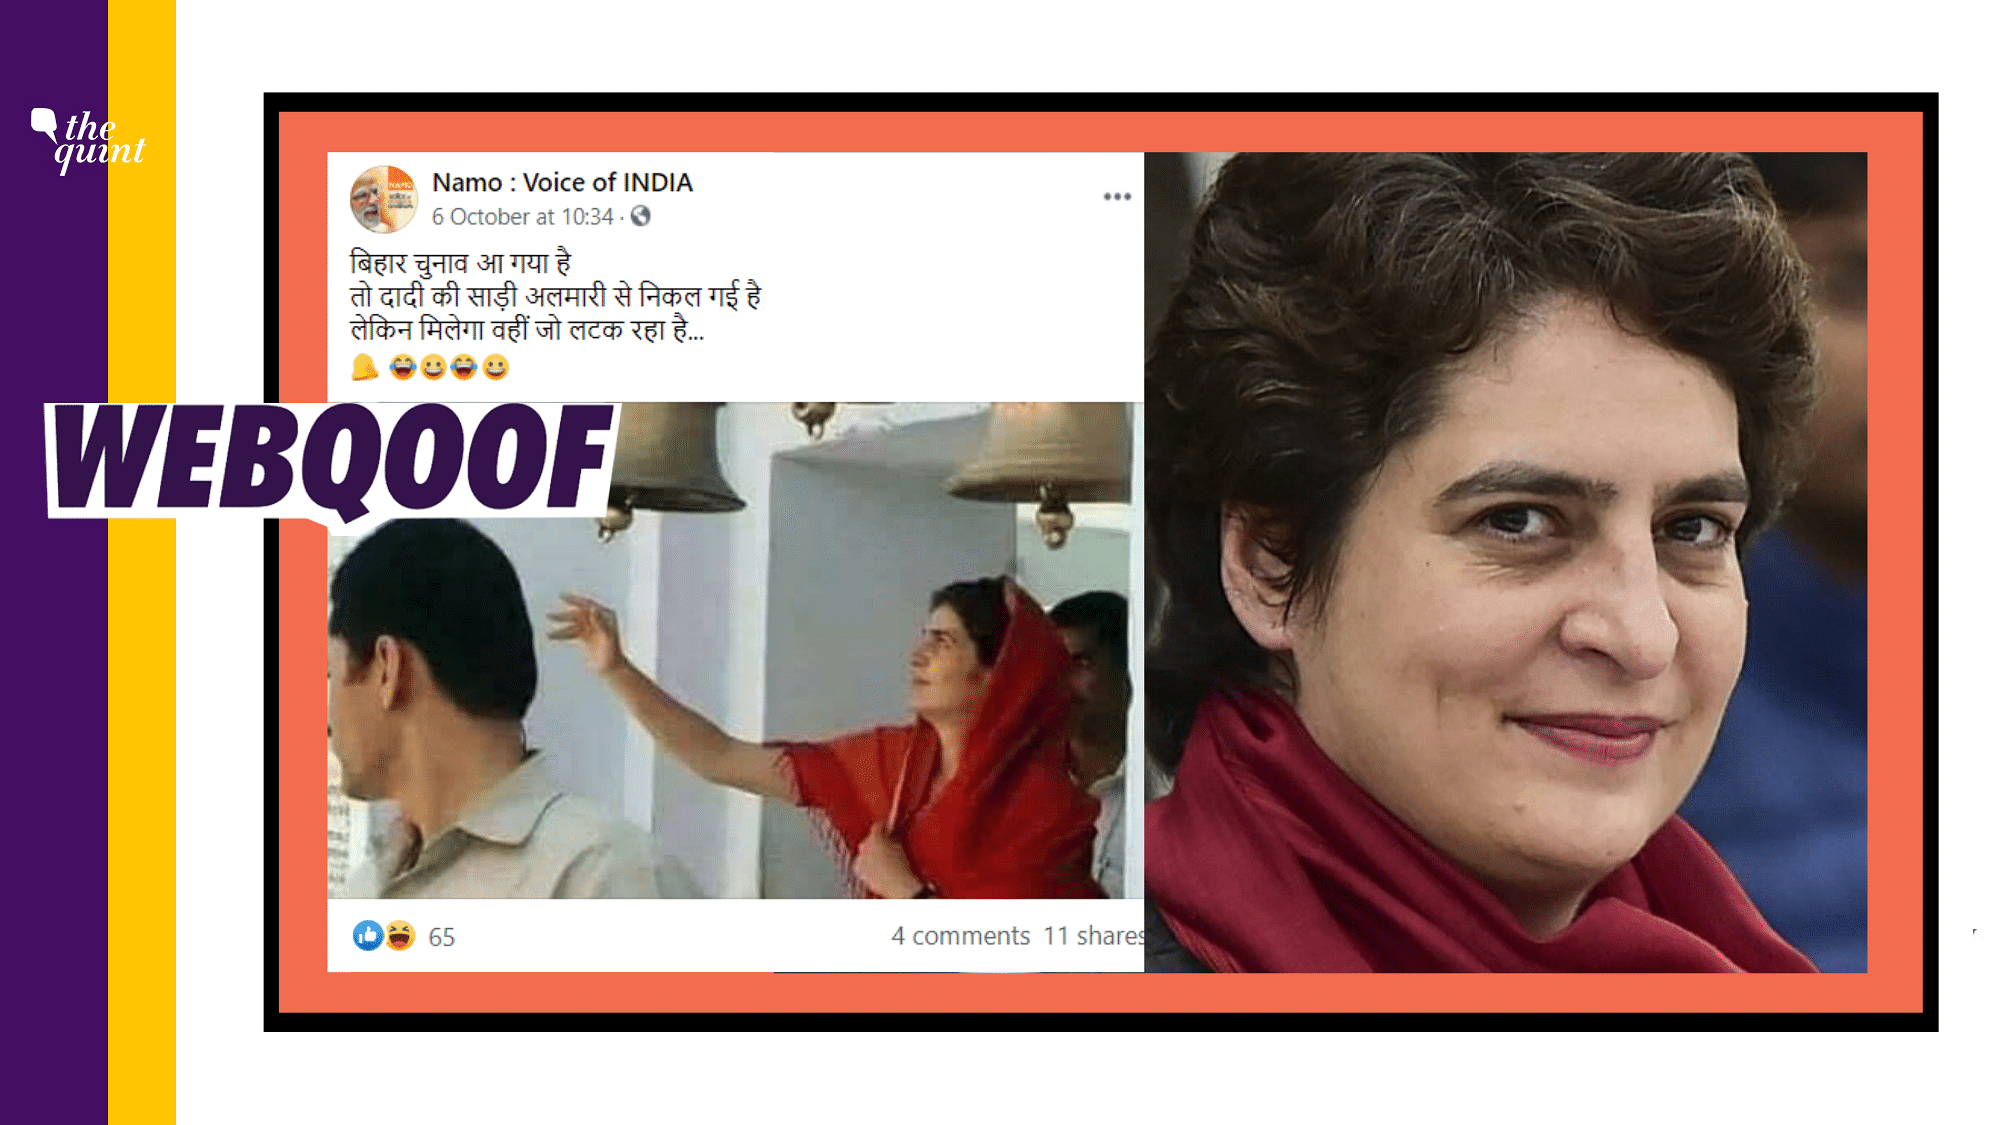 An old image from 2009 of Congress leader Priyanka Gandhi ringing the bell at a temple has resurfaced as her election ‘campaign’ for the upcoming Bihar Elections.